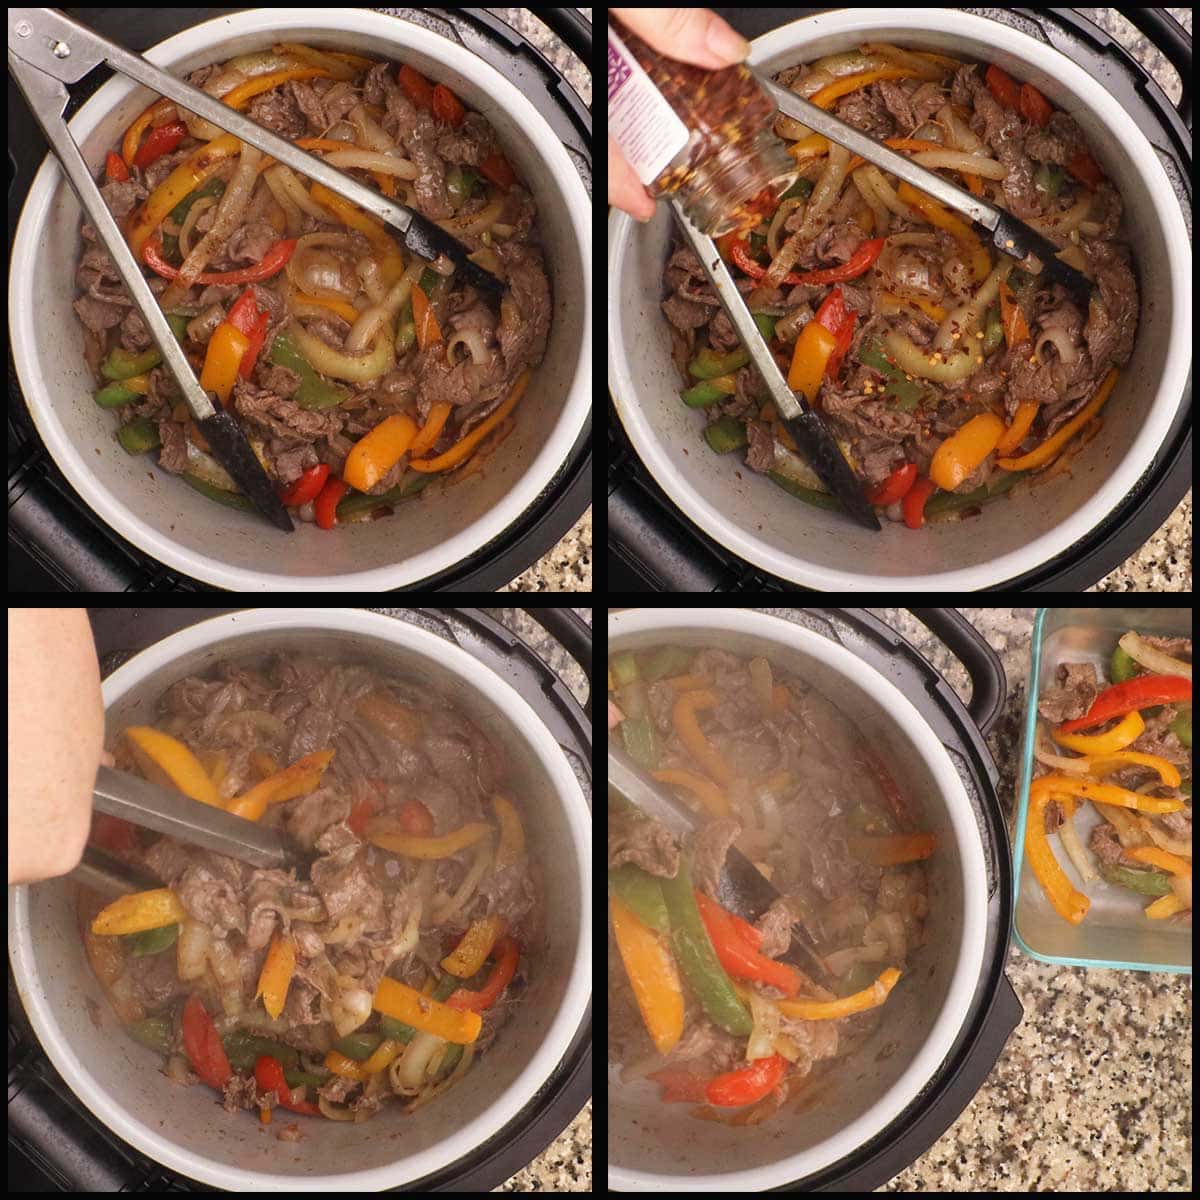 Mixing the peppers with the meat and warming through